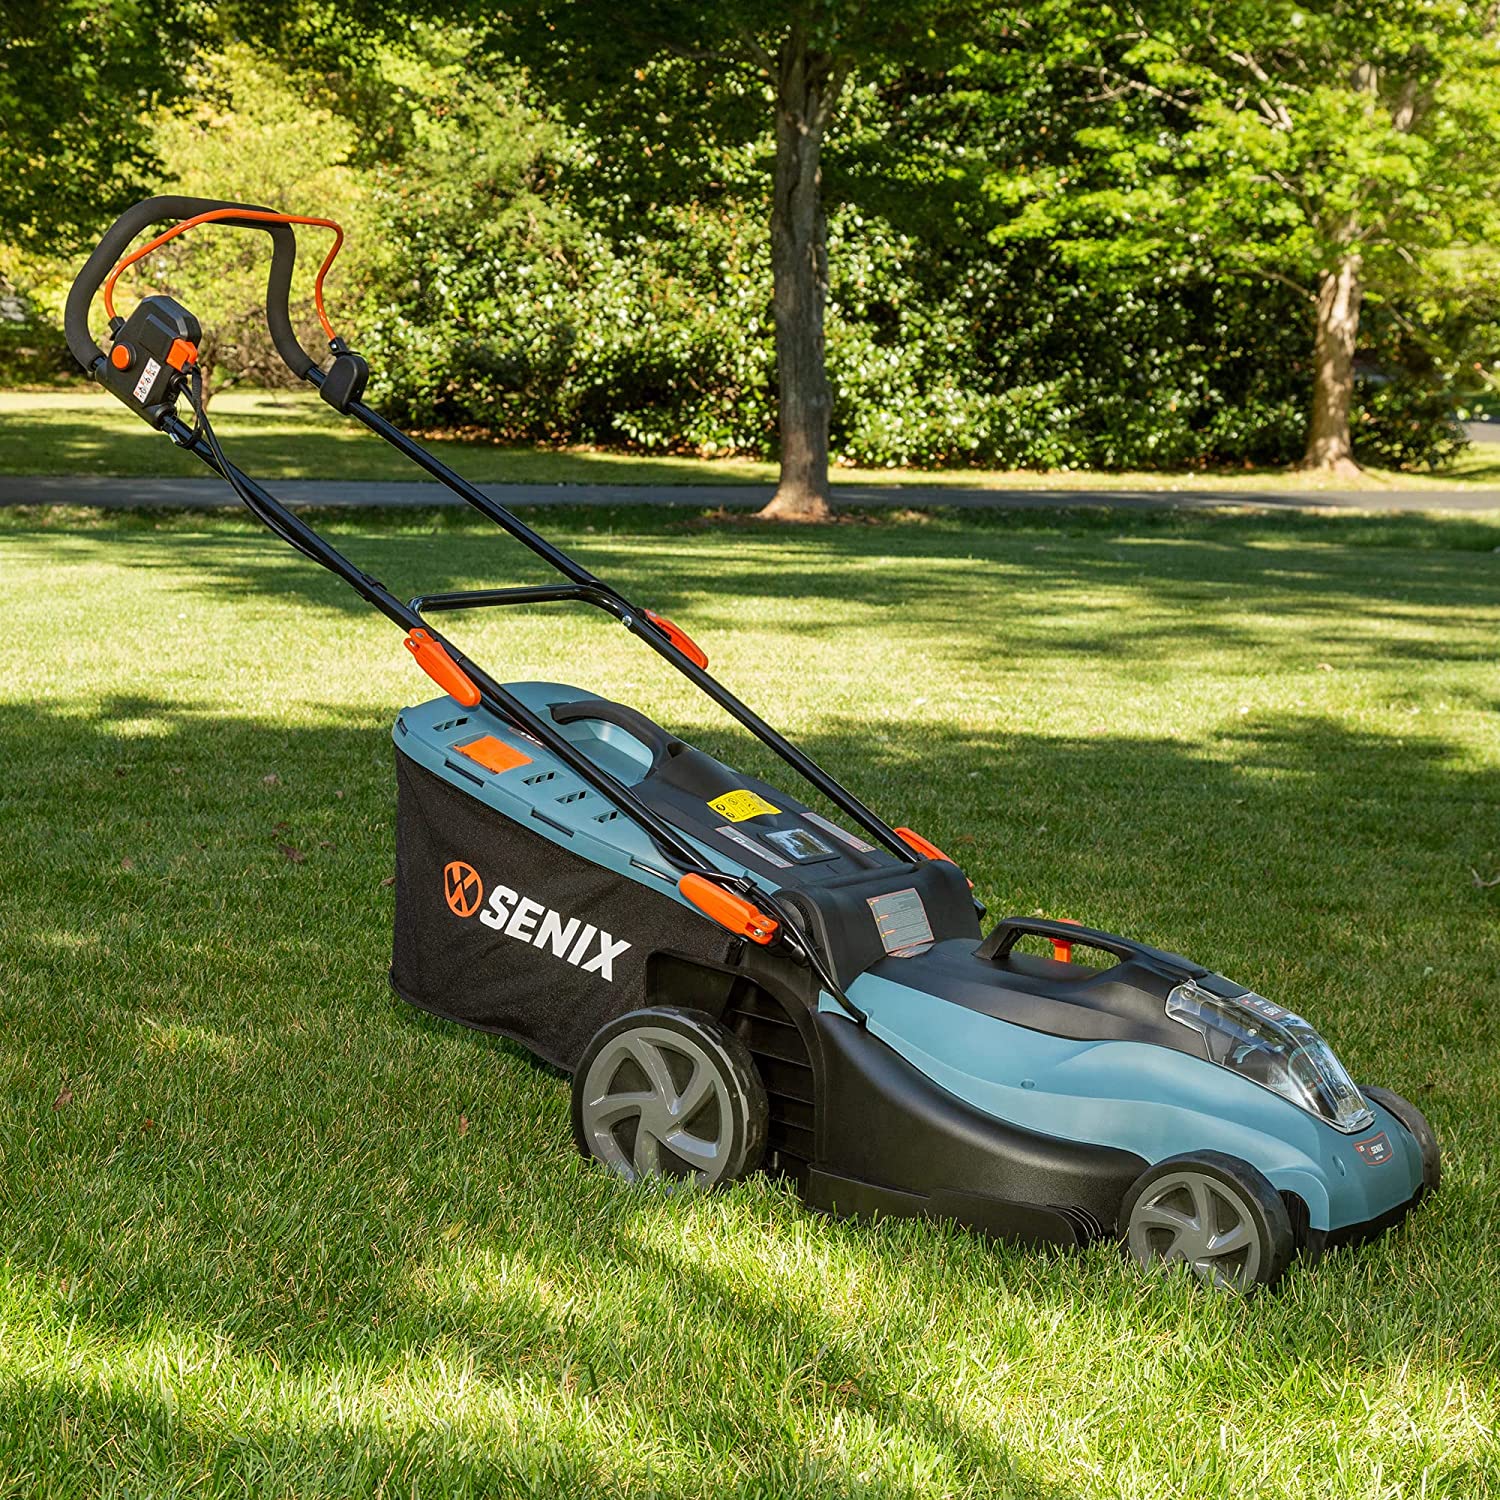 SENIX Electric Lawn Mower， 15-Inch， 58V Max* Cordless Lawn Mower with Brushless Motor， 6-Position Height Adjustment， 2.5Ah Lithium Ion Battery and Charger Included， LPPX5-L， Blue